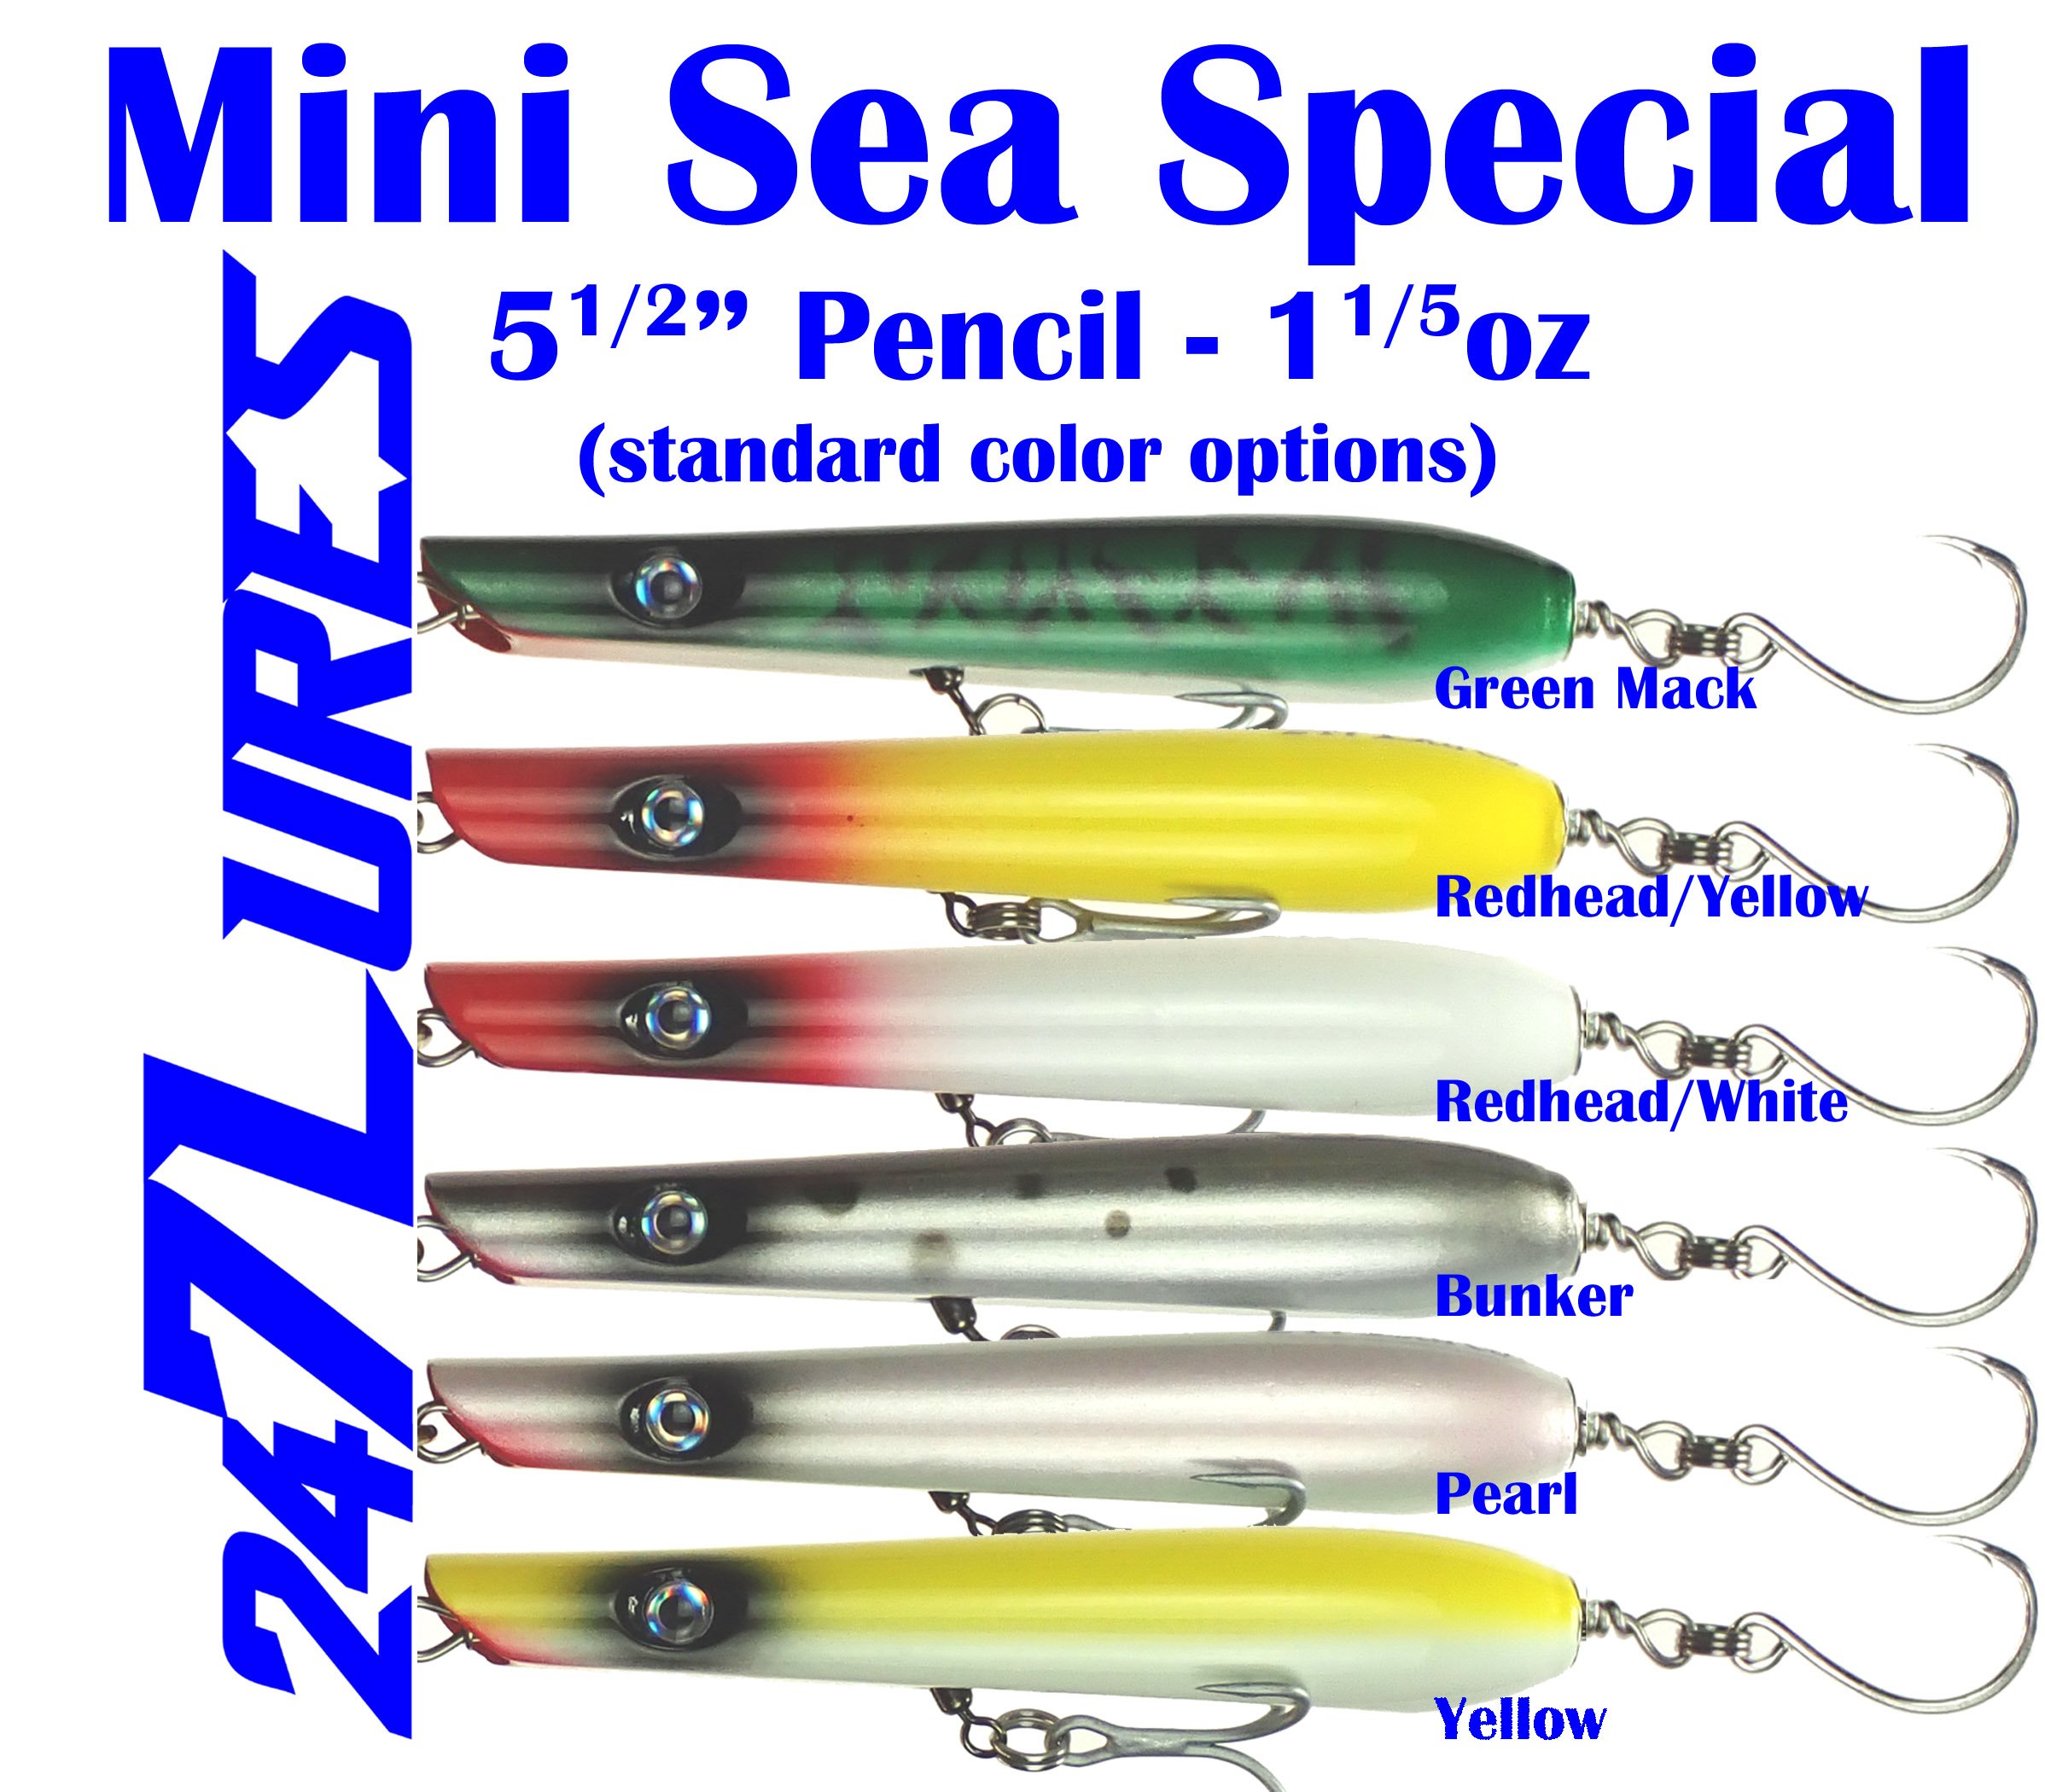 247 Lures - Handmade wooden lures